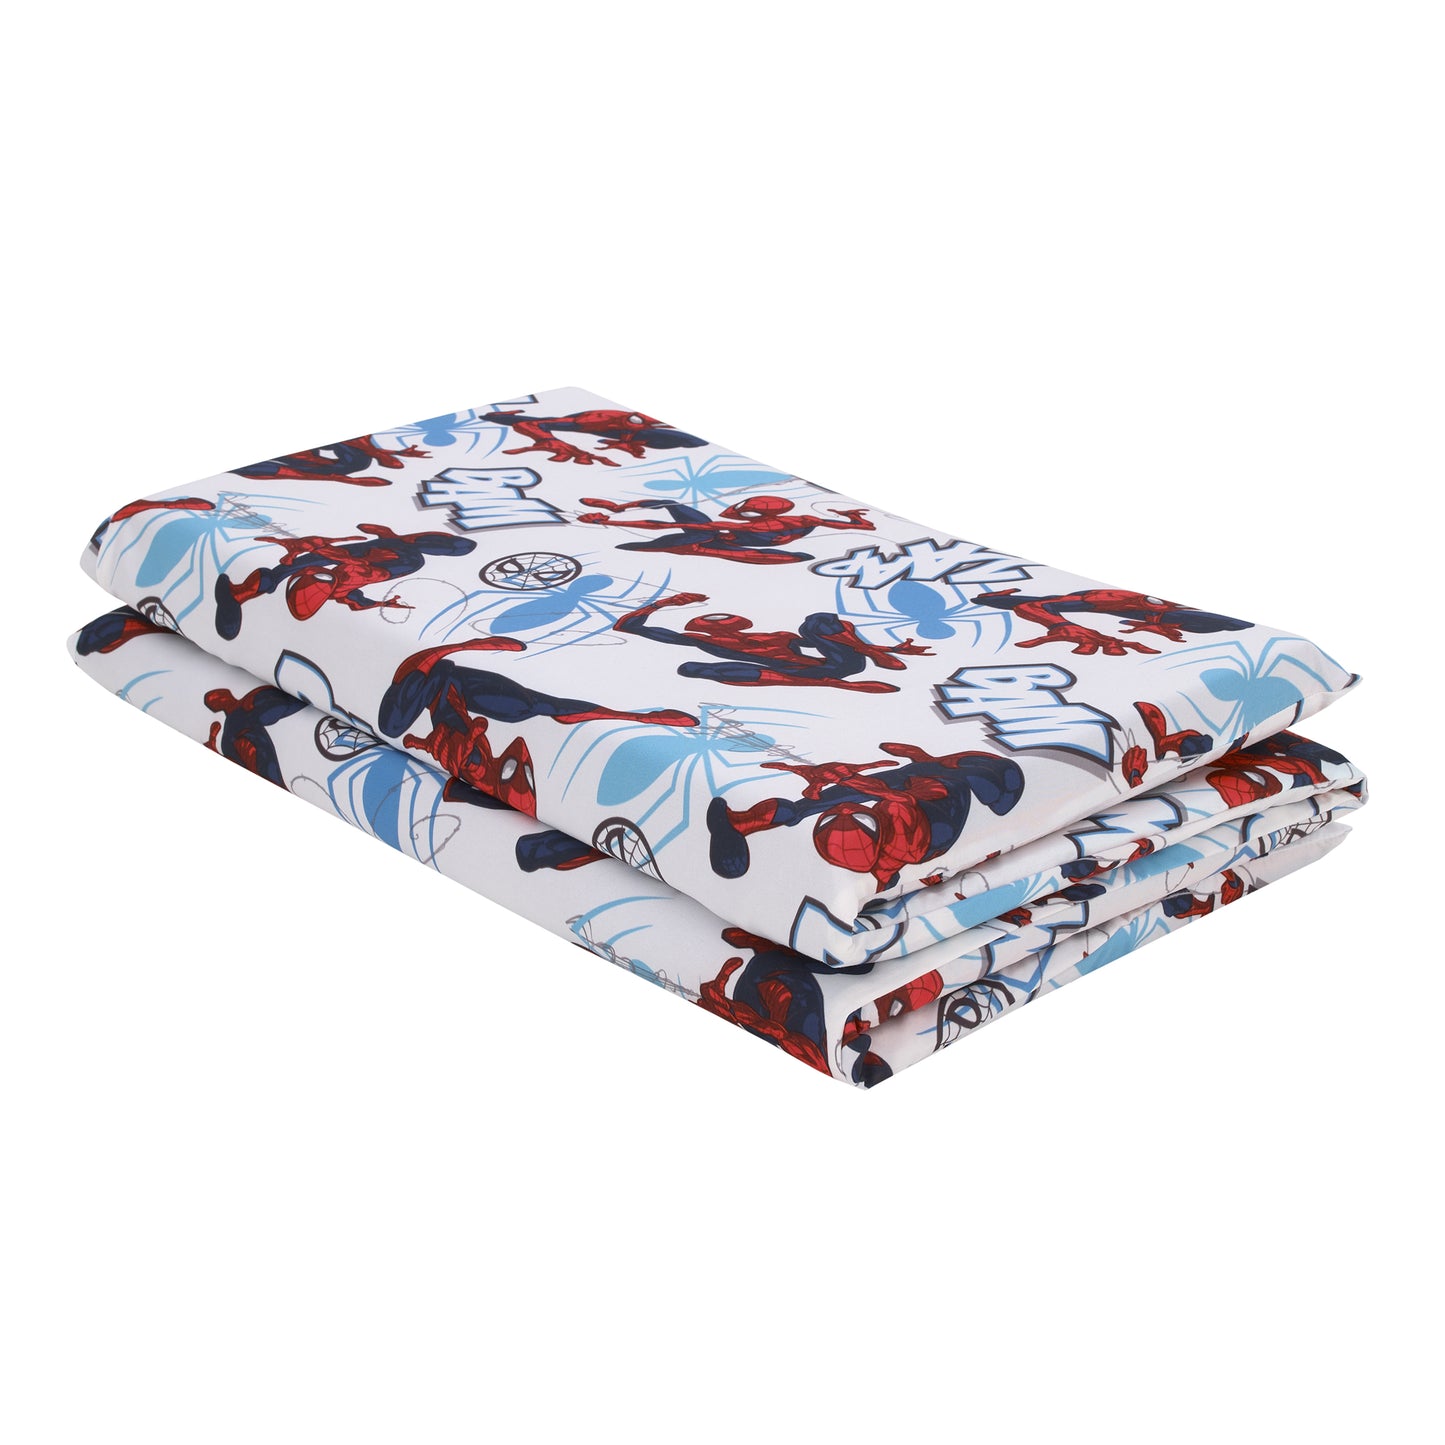 Marvel Spiderman to the Rescue Red, White, and Blue Preschool Nap Pad Sheet